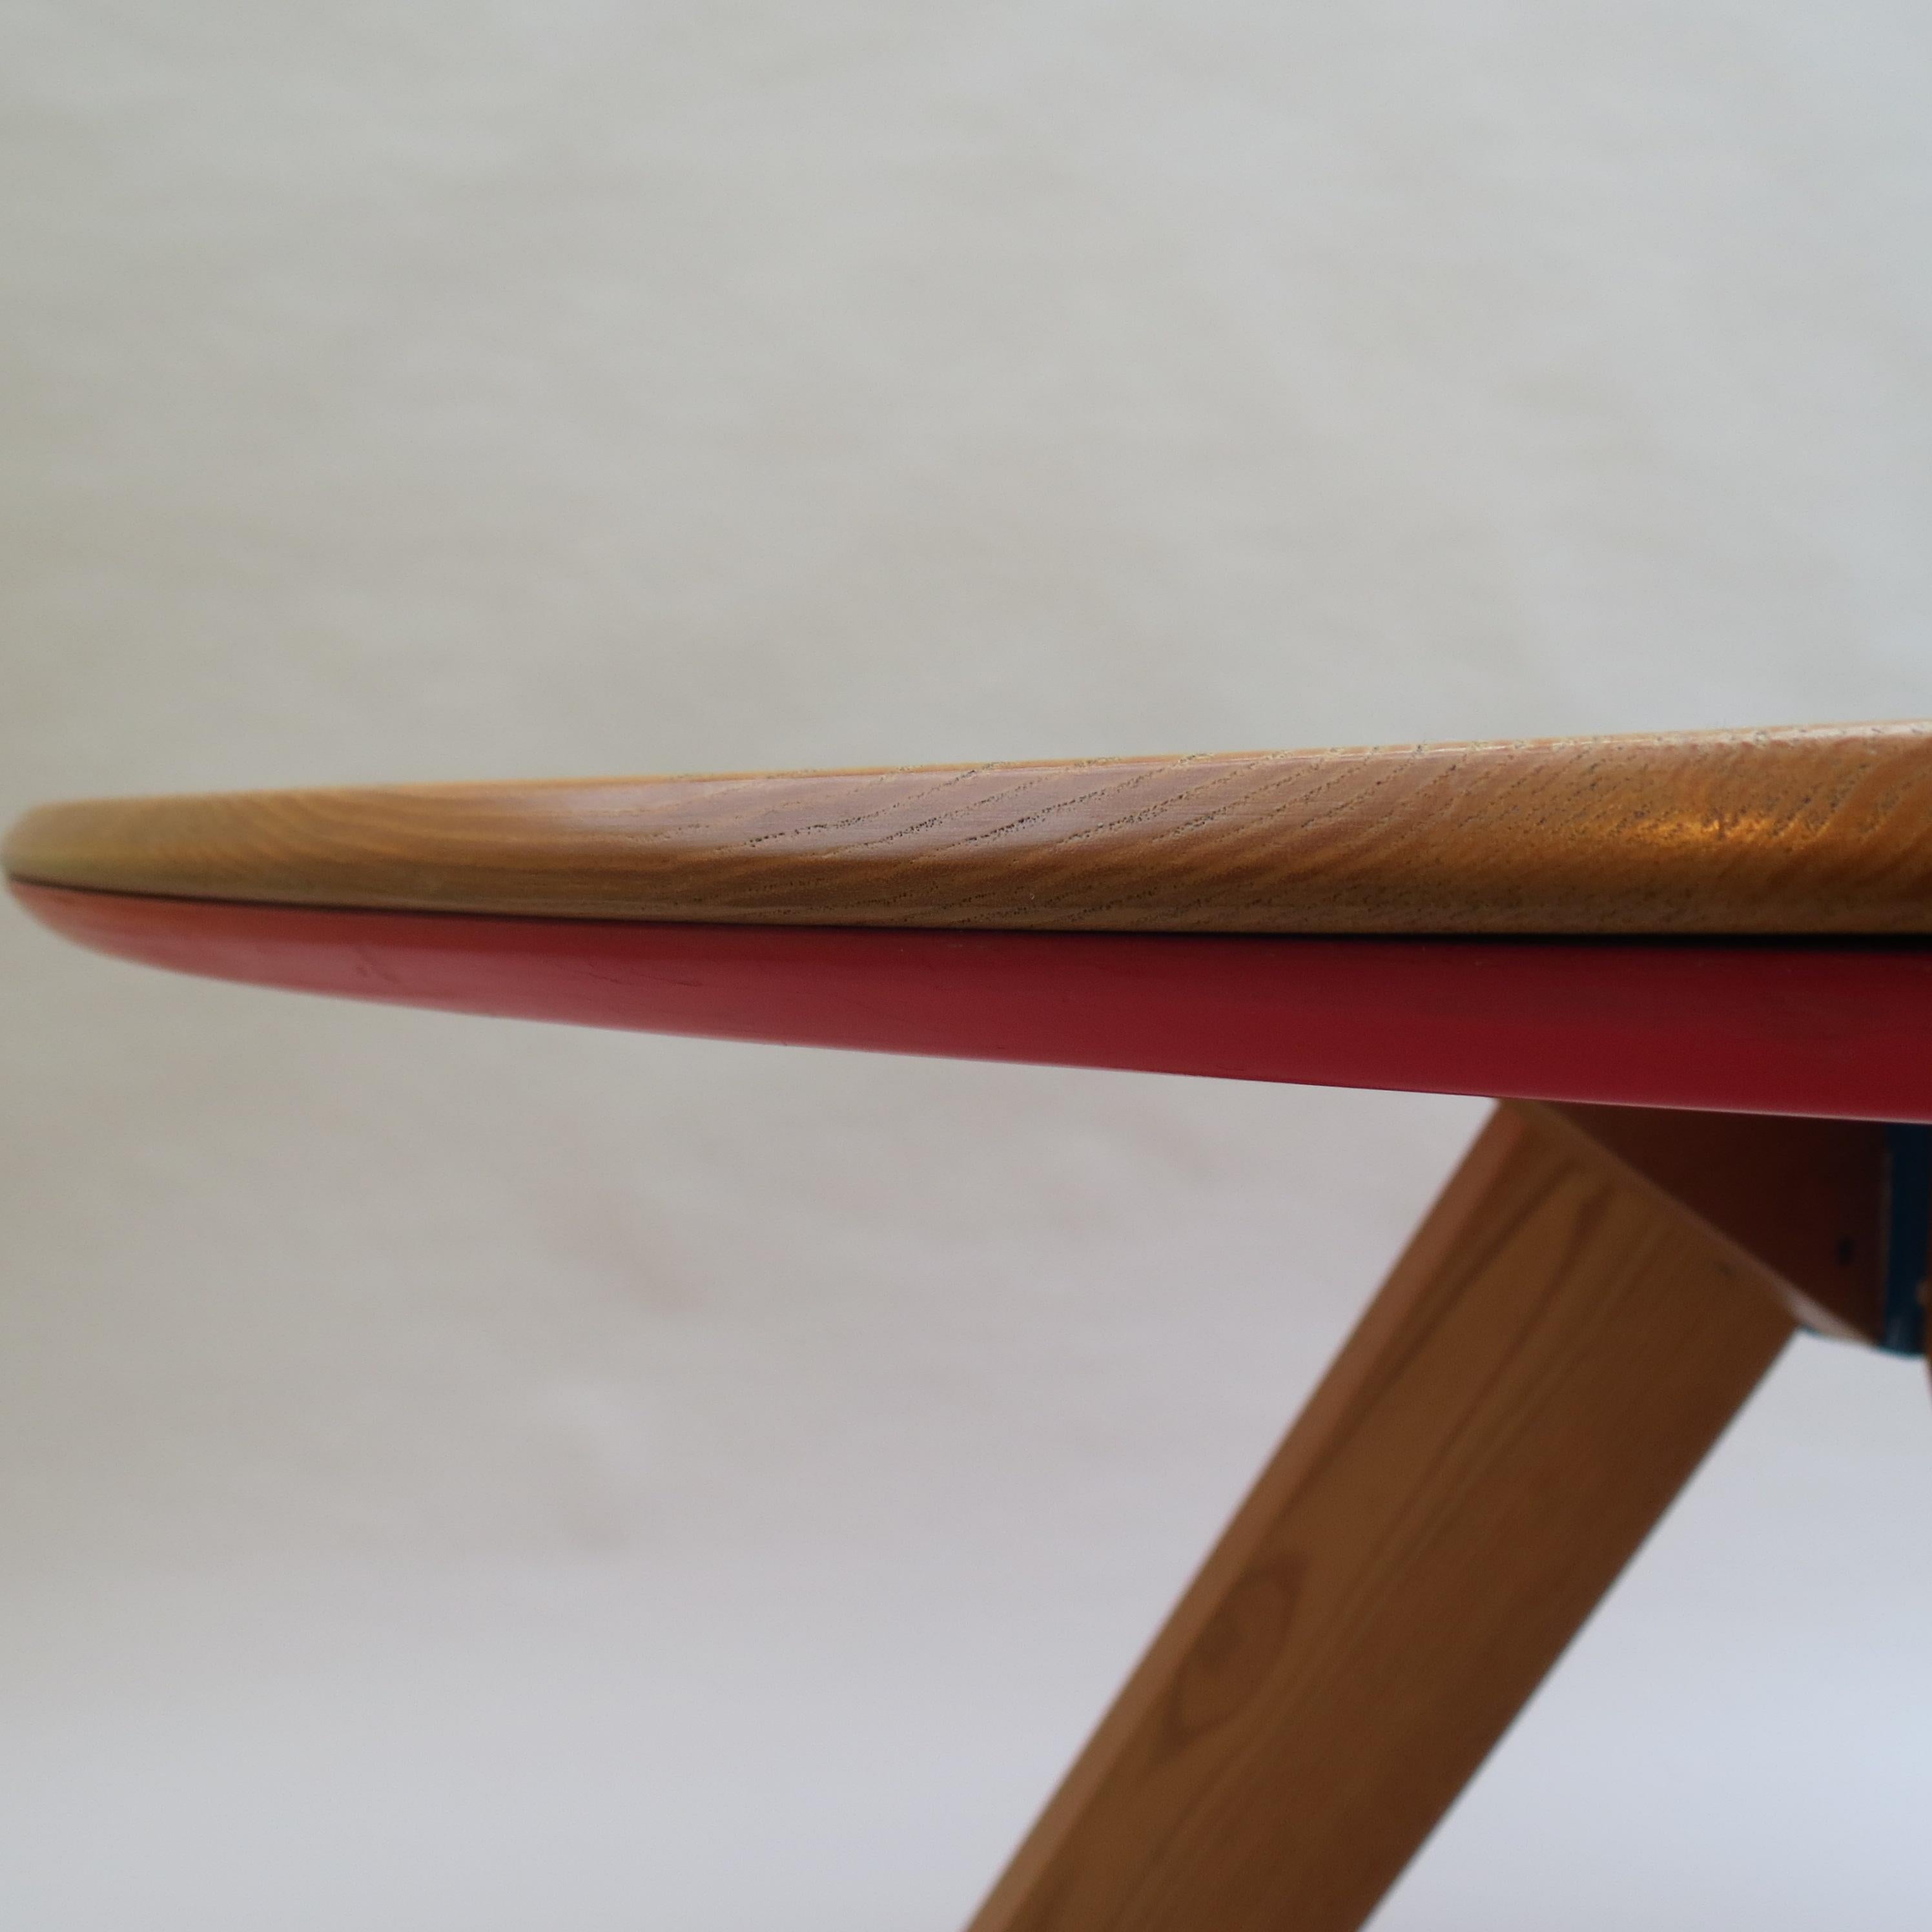 Ash Midcentury Bespoke Round Dining Table by David Field 1980s with Red and Blue Det